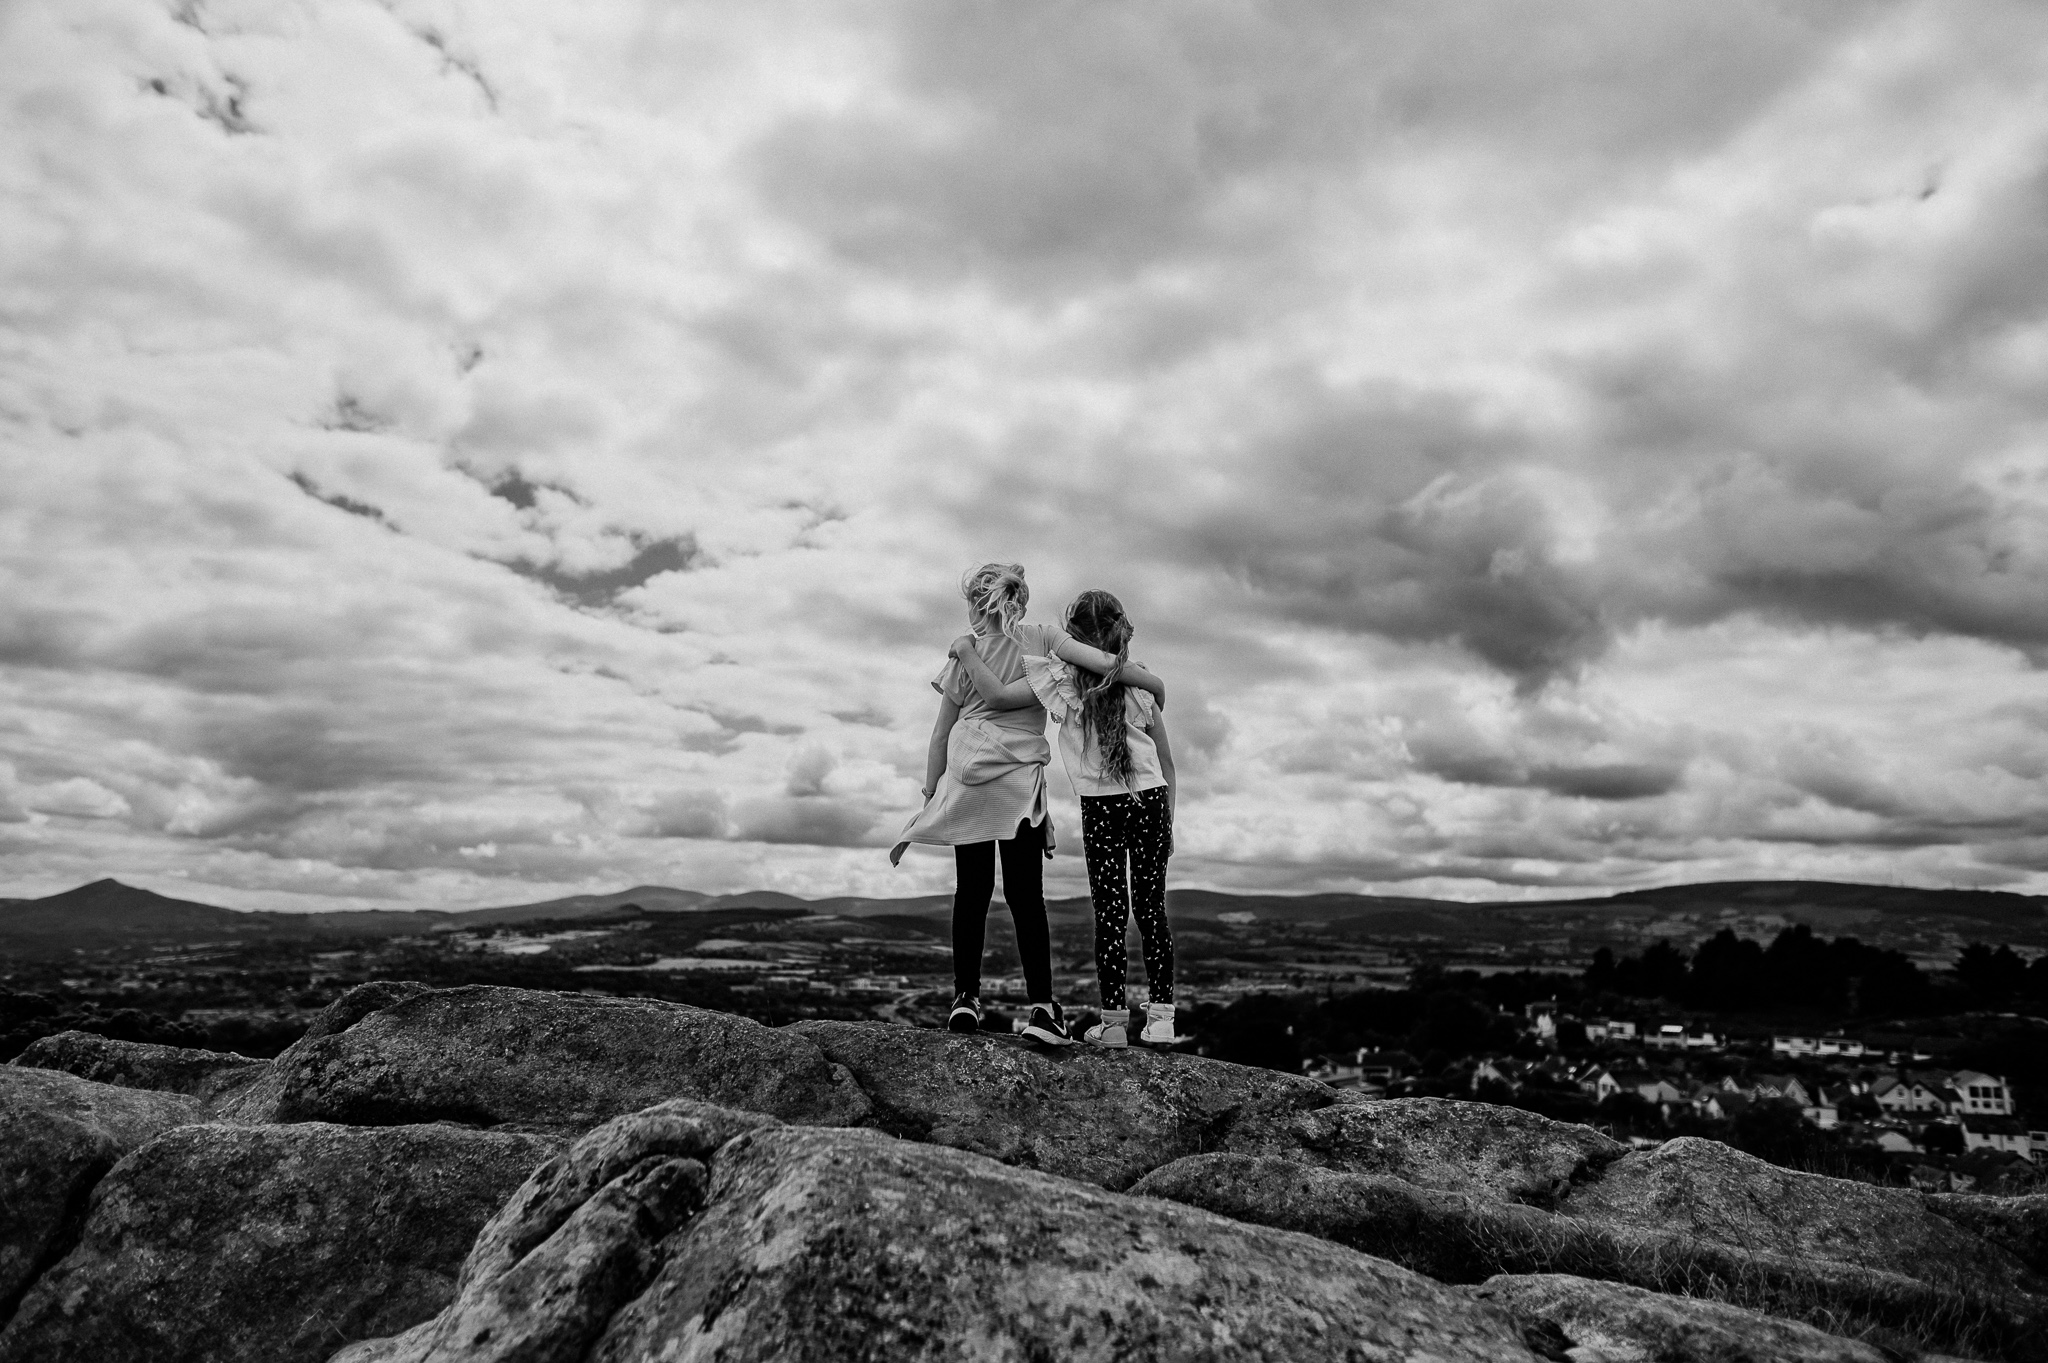 Girls embracing on the mountain with beautiful sky behind them